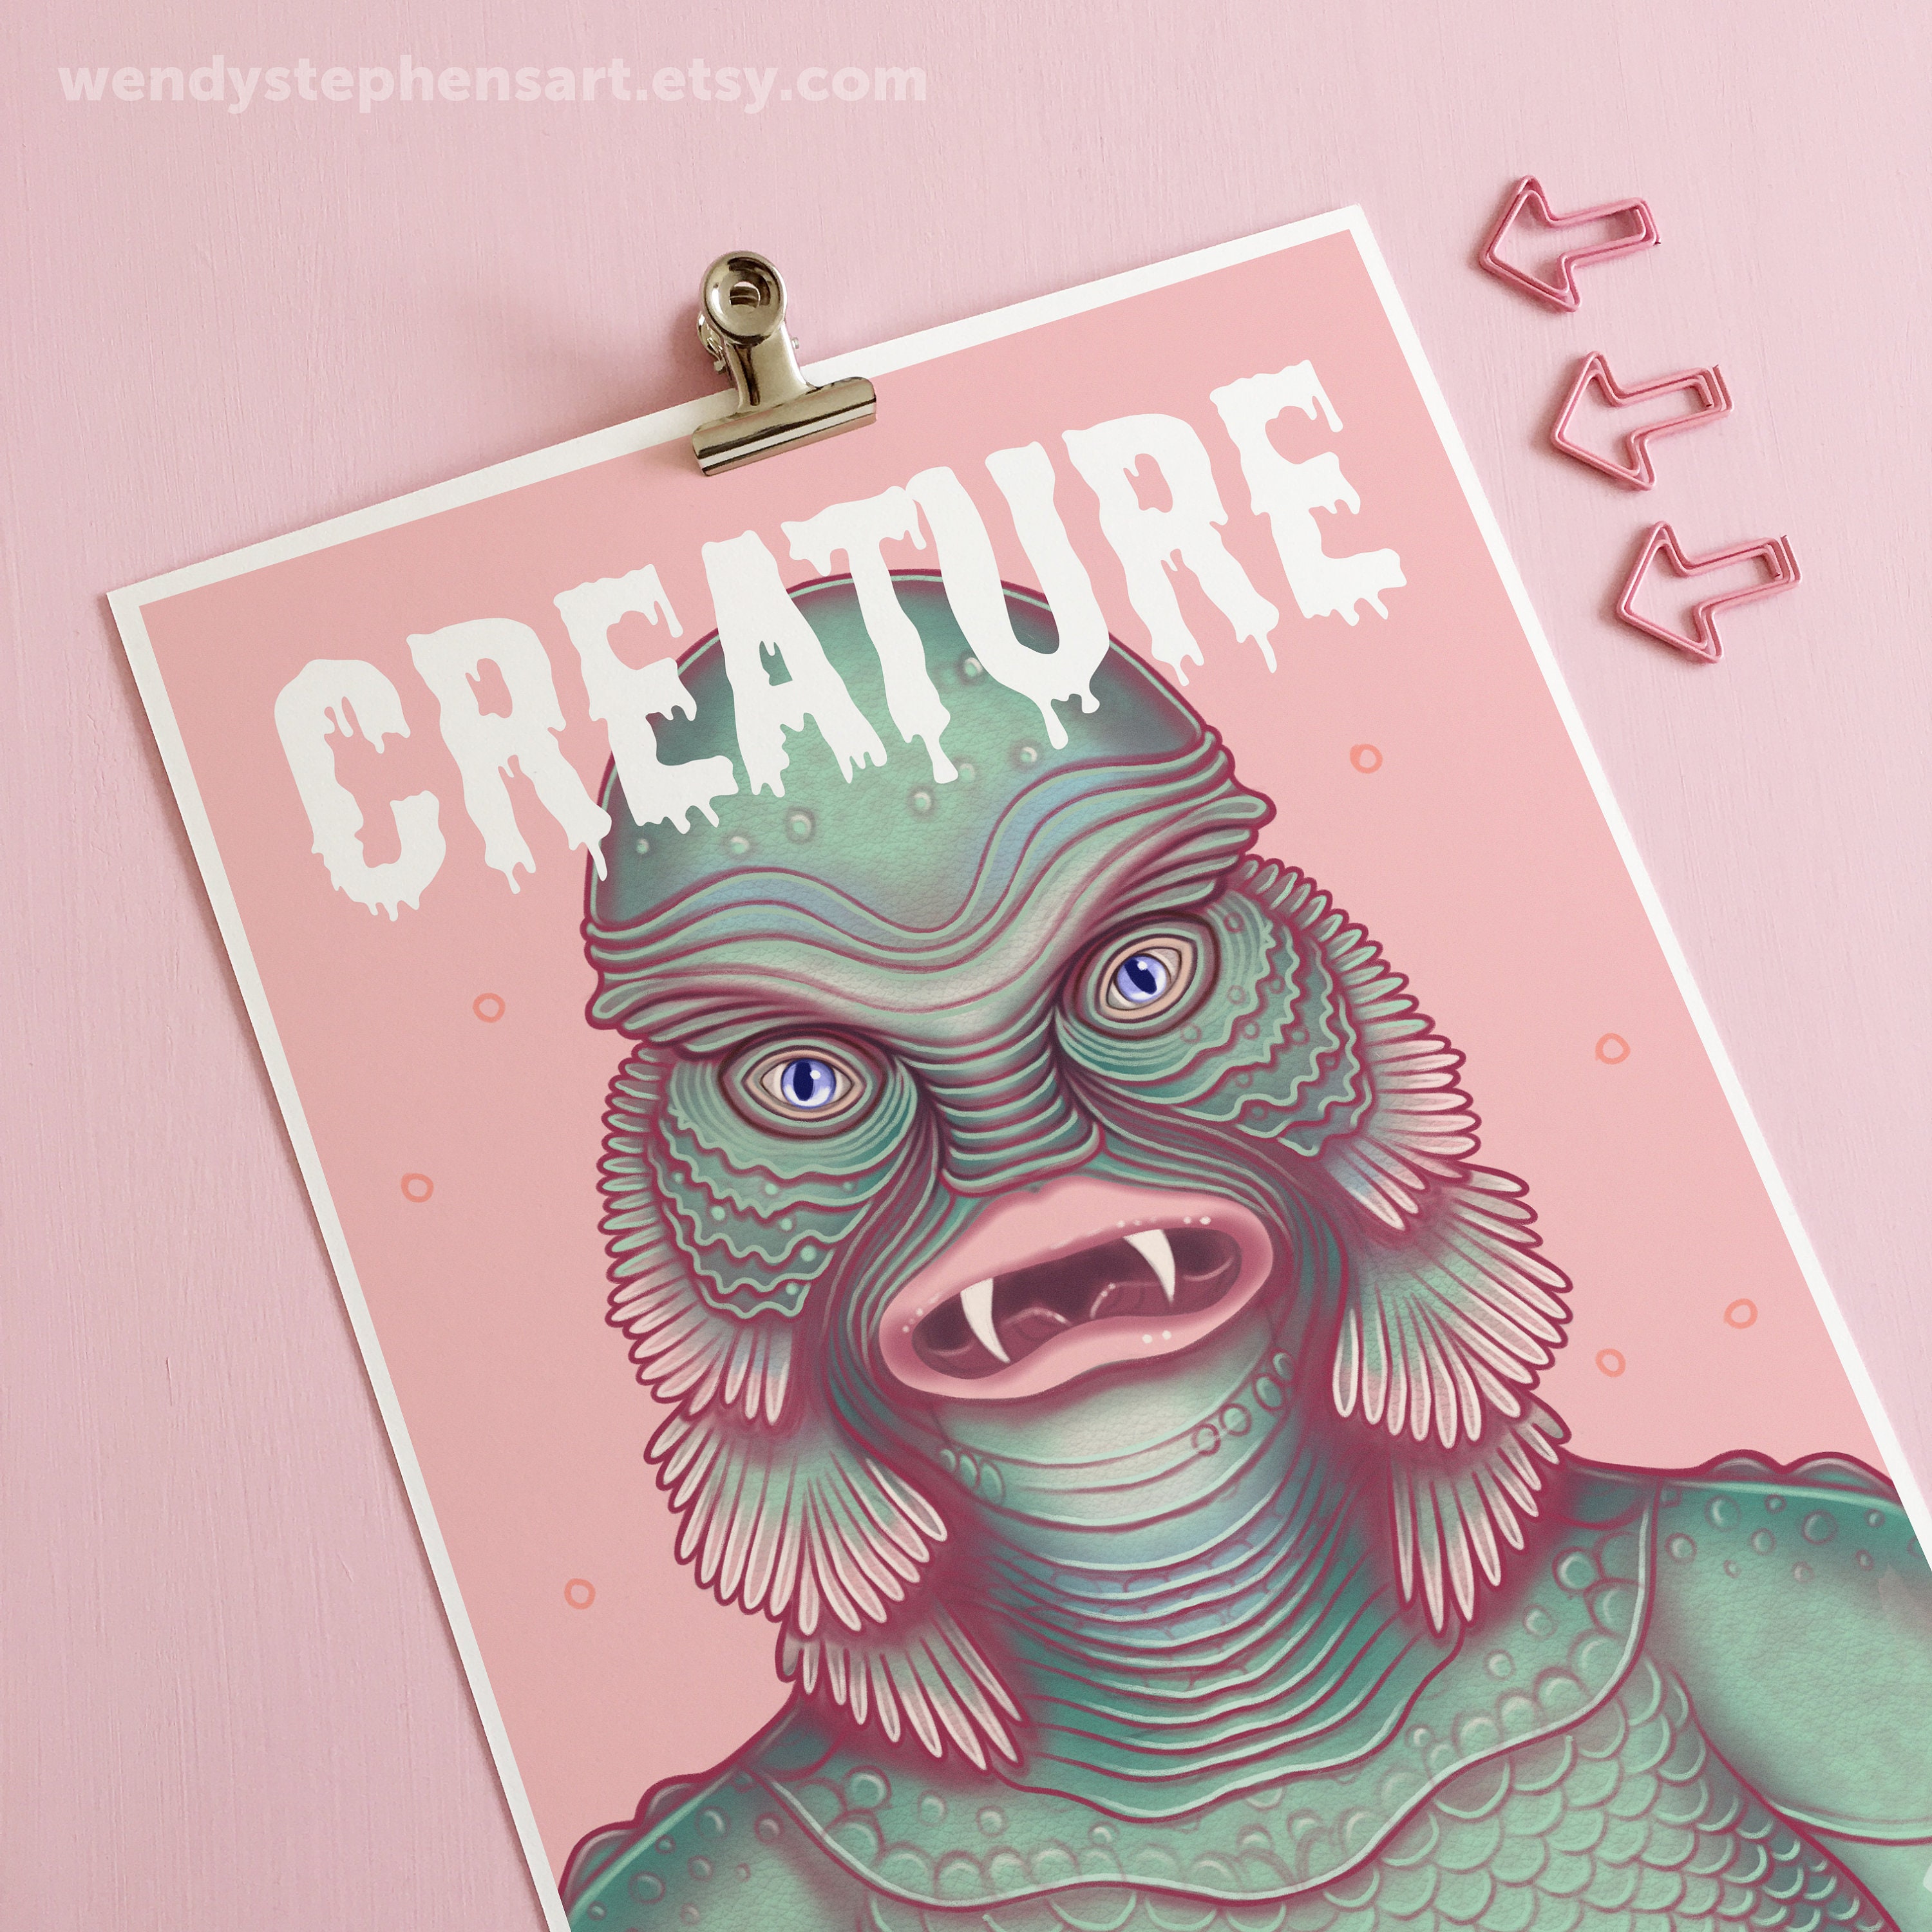 Creature From The Black Lagoon Classic Horror Movie Film Poster Gift Art Print 